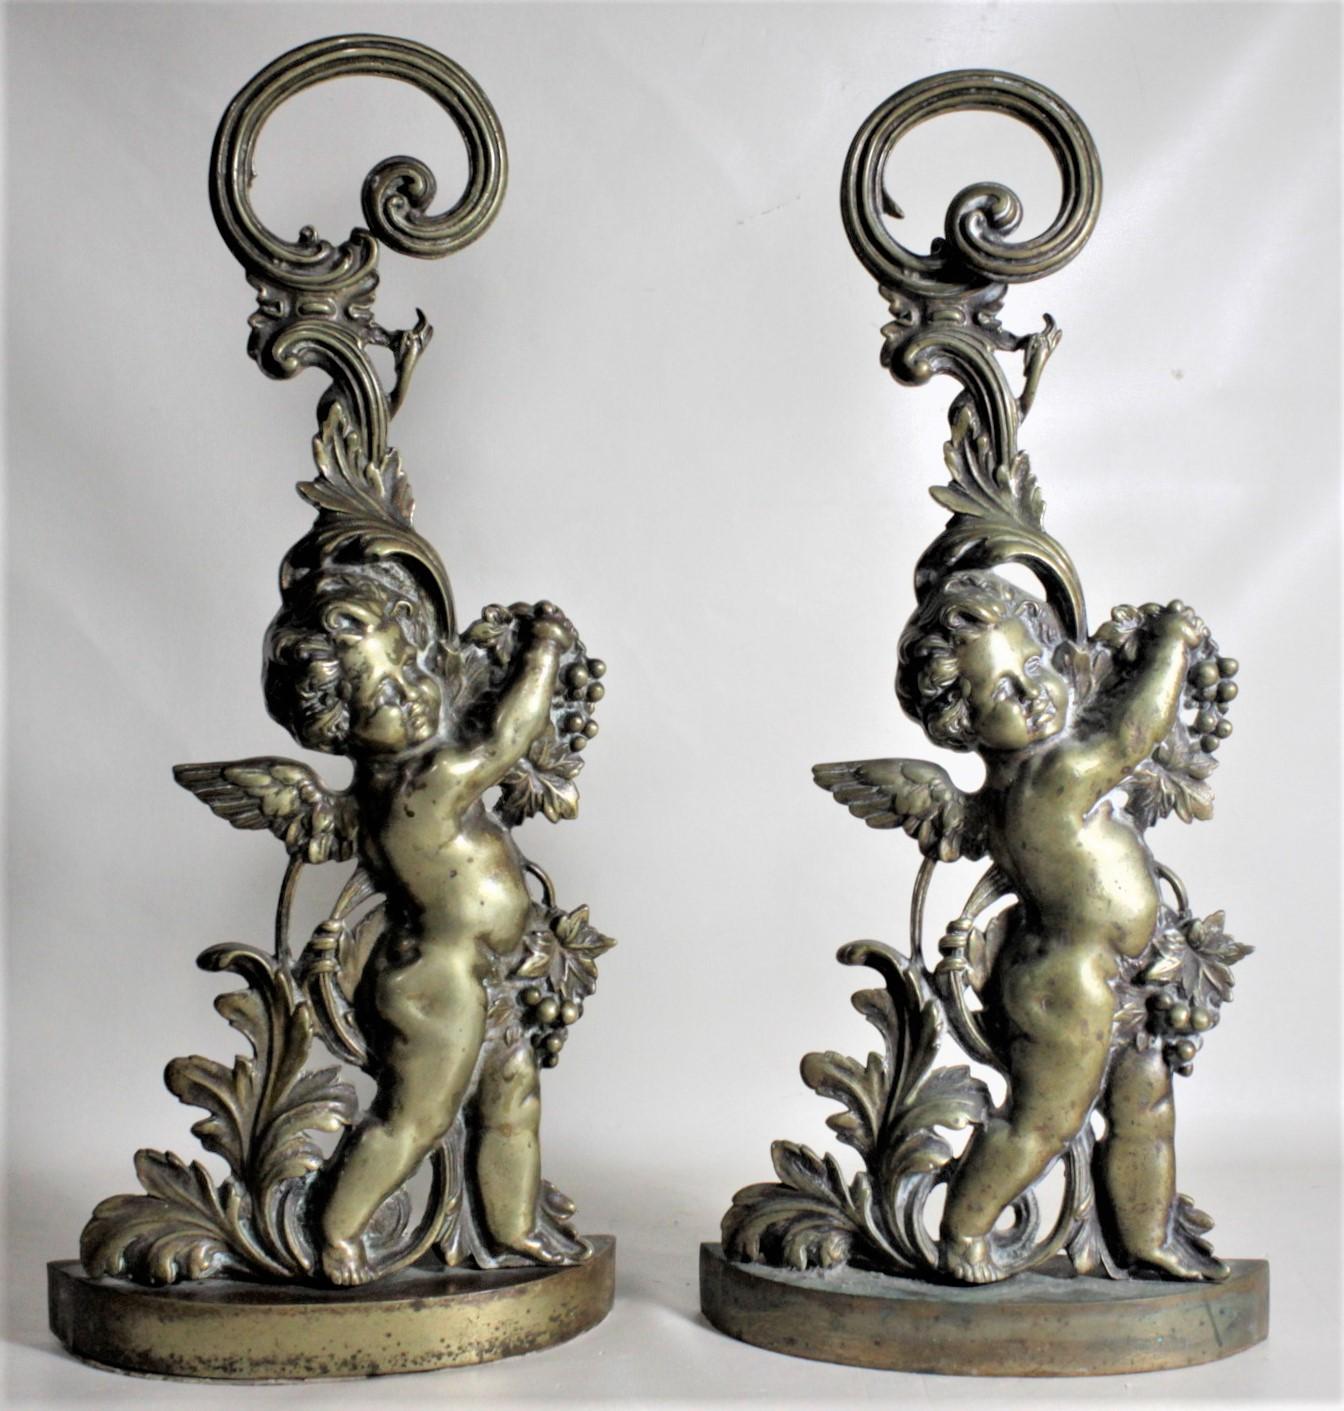 This pair of antique detailed cast brass figural cherub door stops are unsigned, but presumed to have been made in the United States in circa 1880 in the period Victorian style. These door stops each show a nicely executed cast brass figural cherub